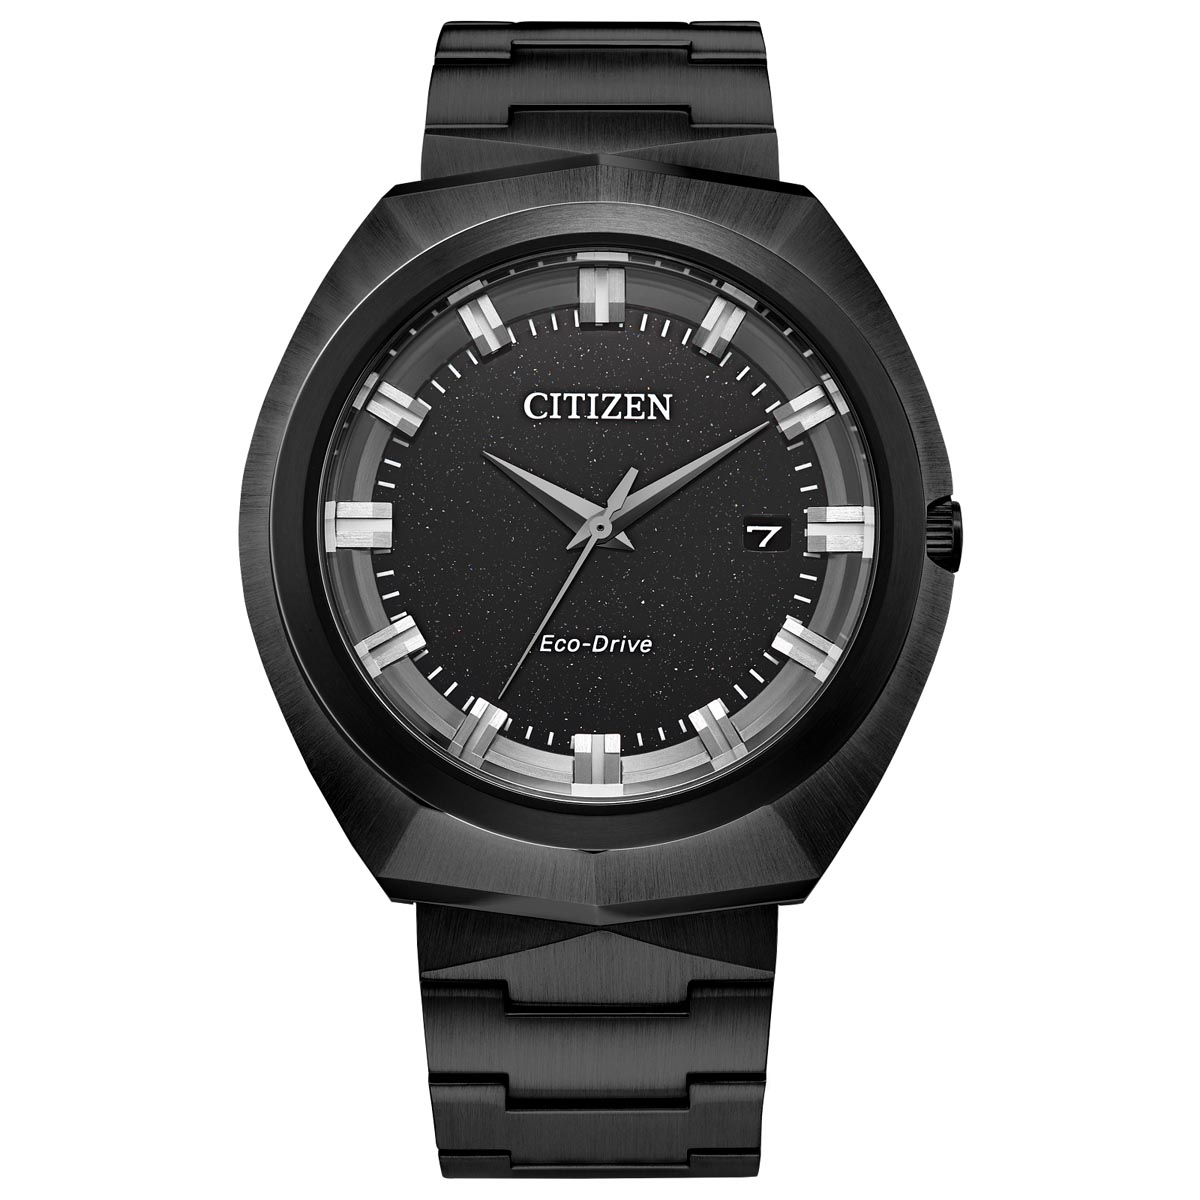 Citizen Eco-Drive 365 Mens Watch with Black Dial and Black stainless Steel Bracelet (eco drive movement)